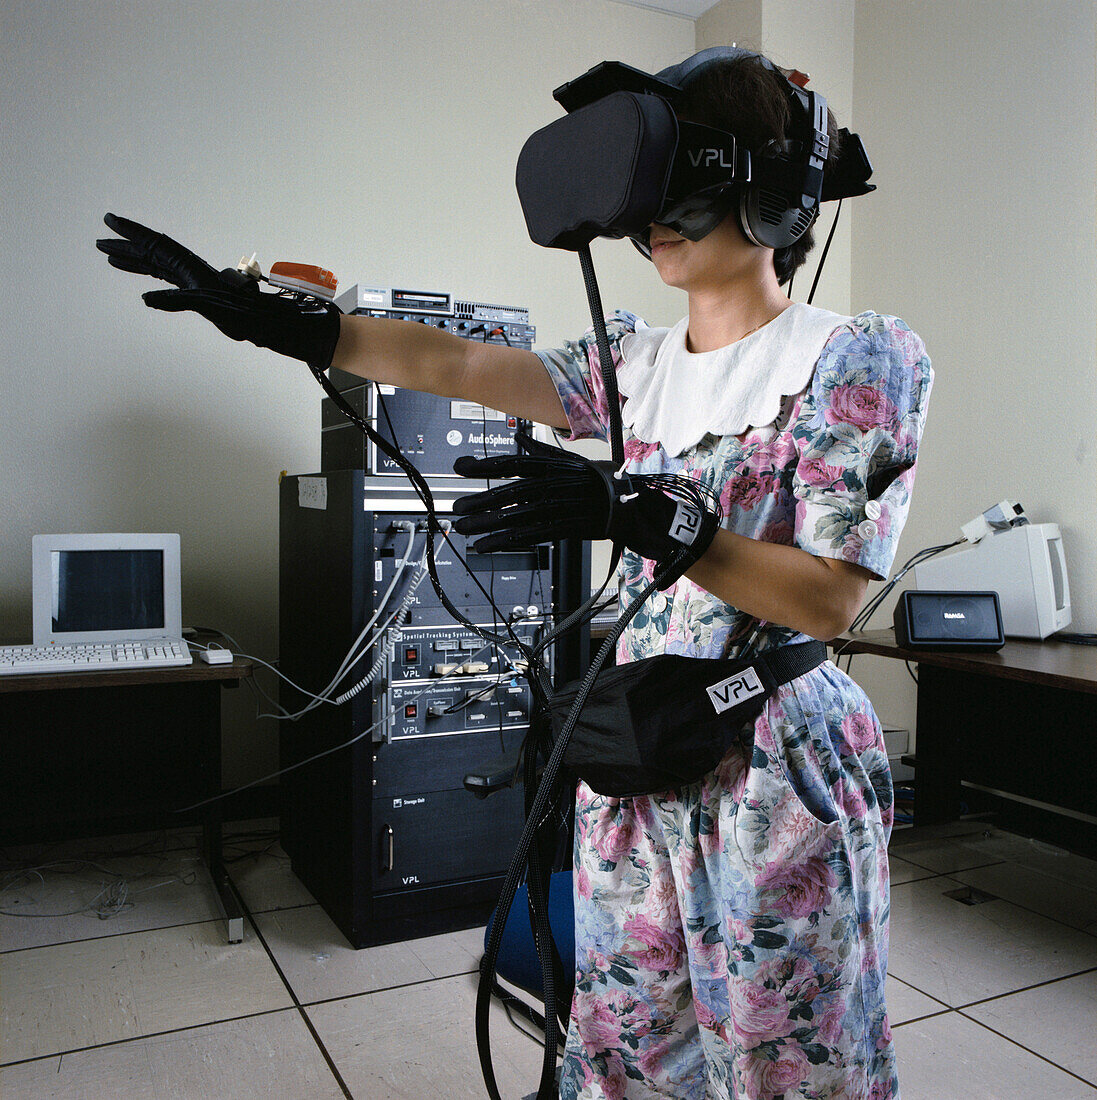 NASA researcher in VR helmet and gloves